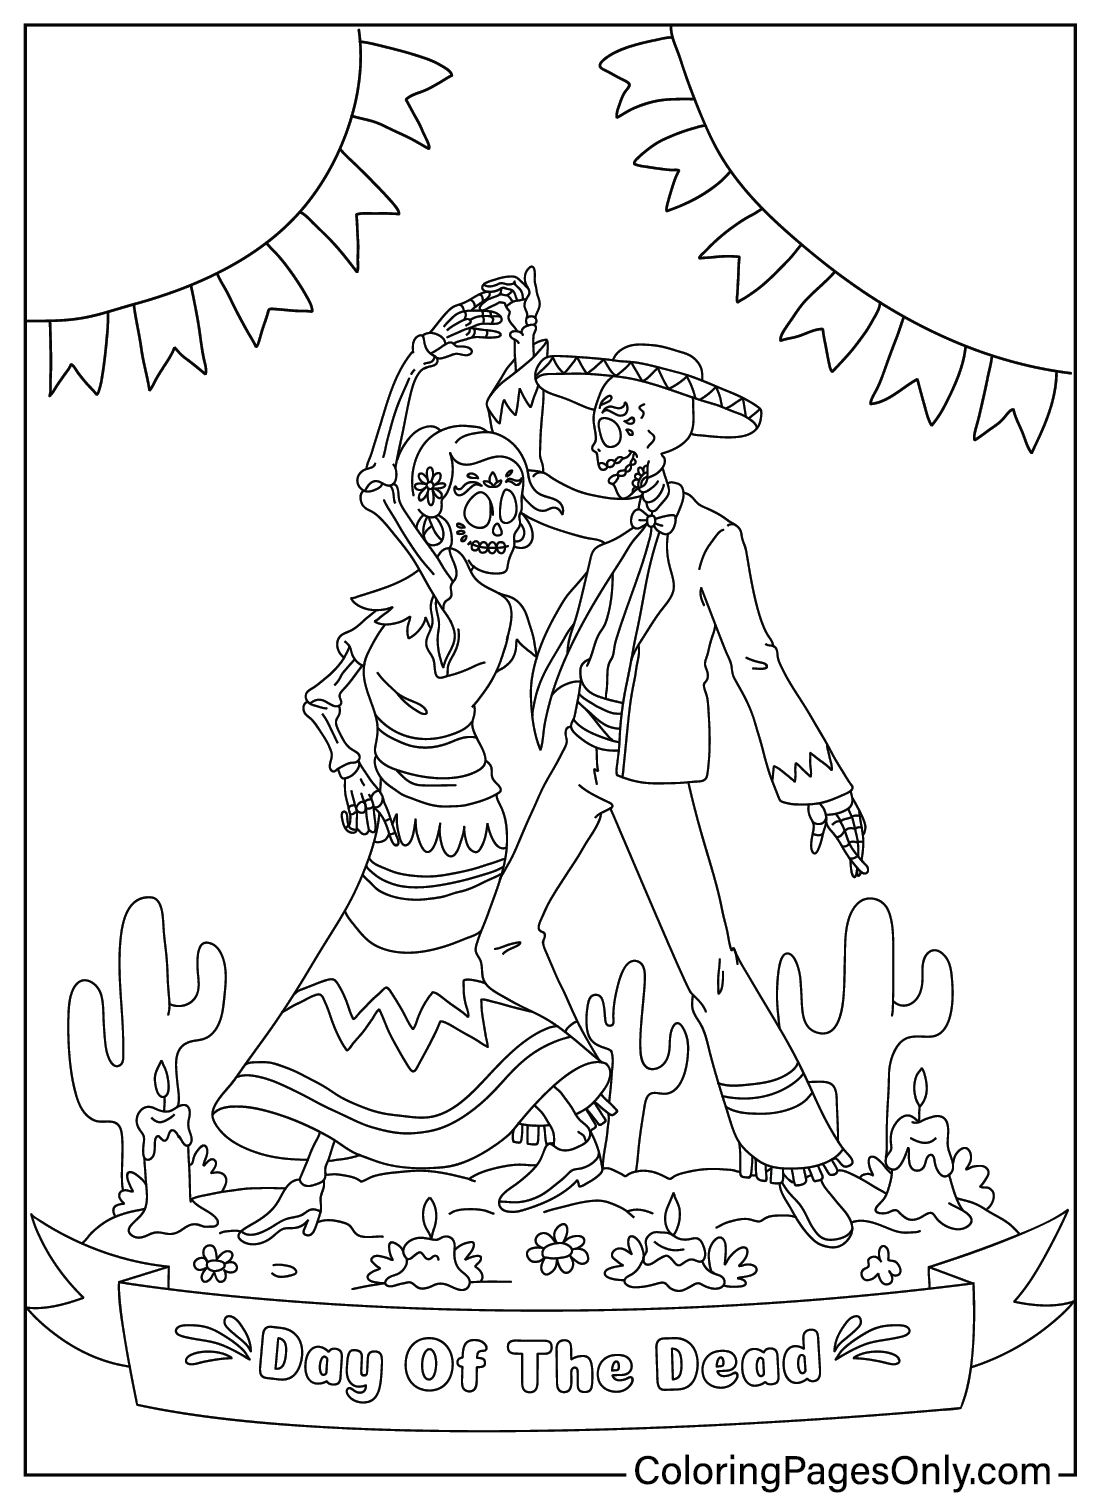 Day of The Dead Coloring